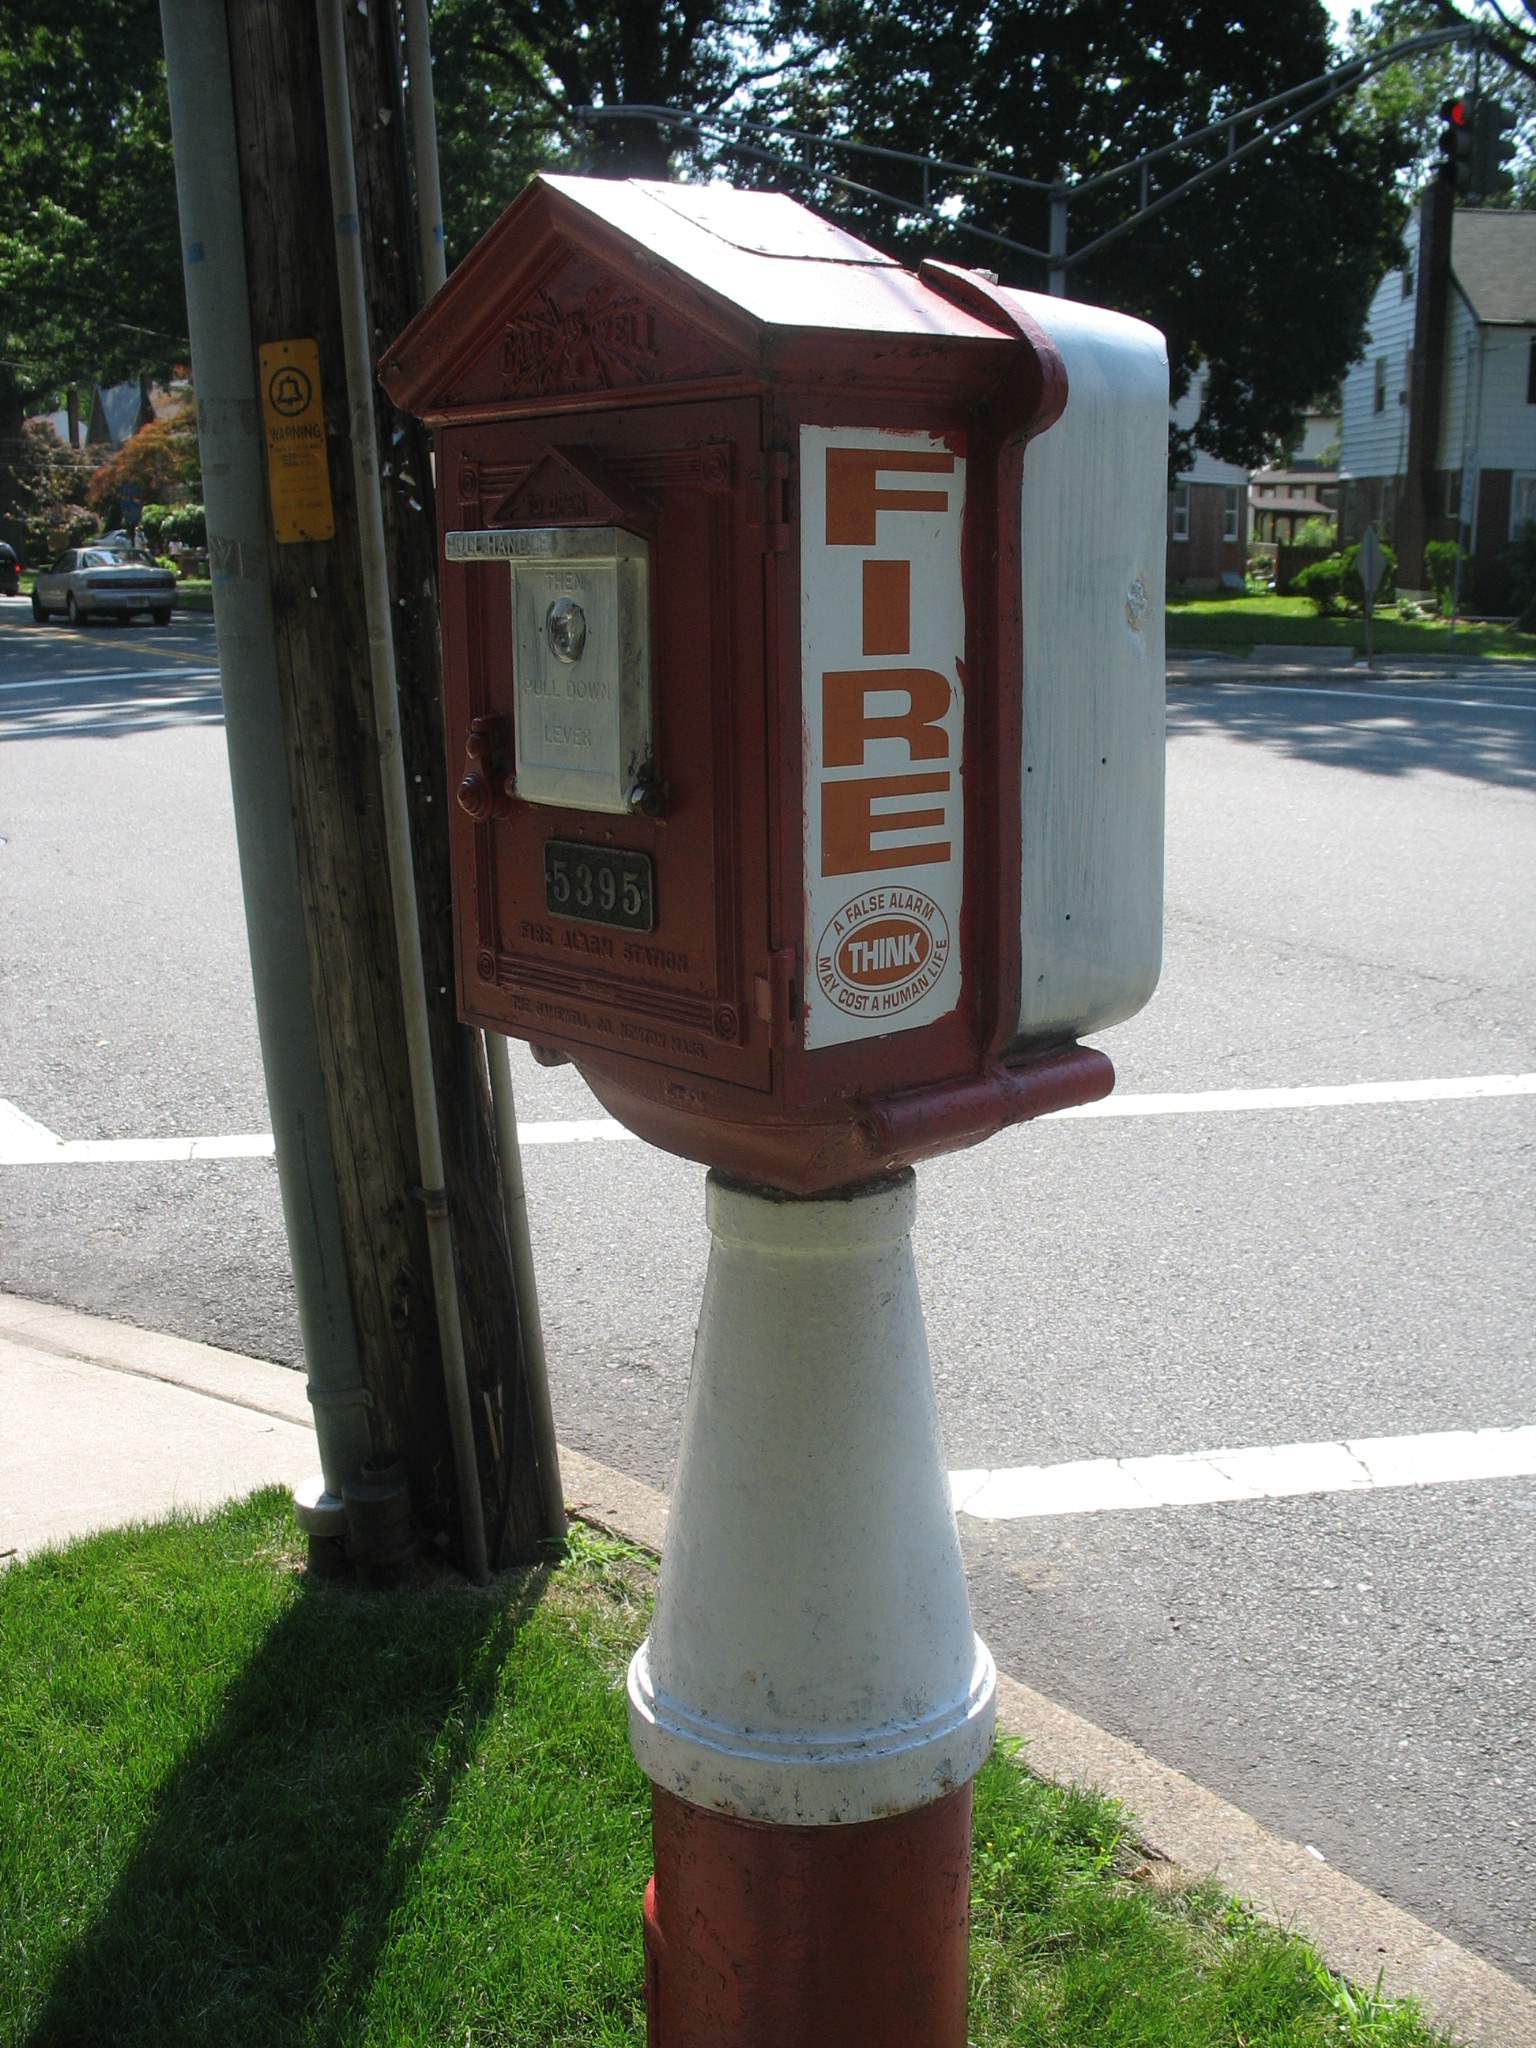 Box 5391 in Bloomfield, NJ at the corner of East Passaic Avenue & Bartlett Street, with an old Police Telegraph Box piggybacking it.